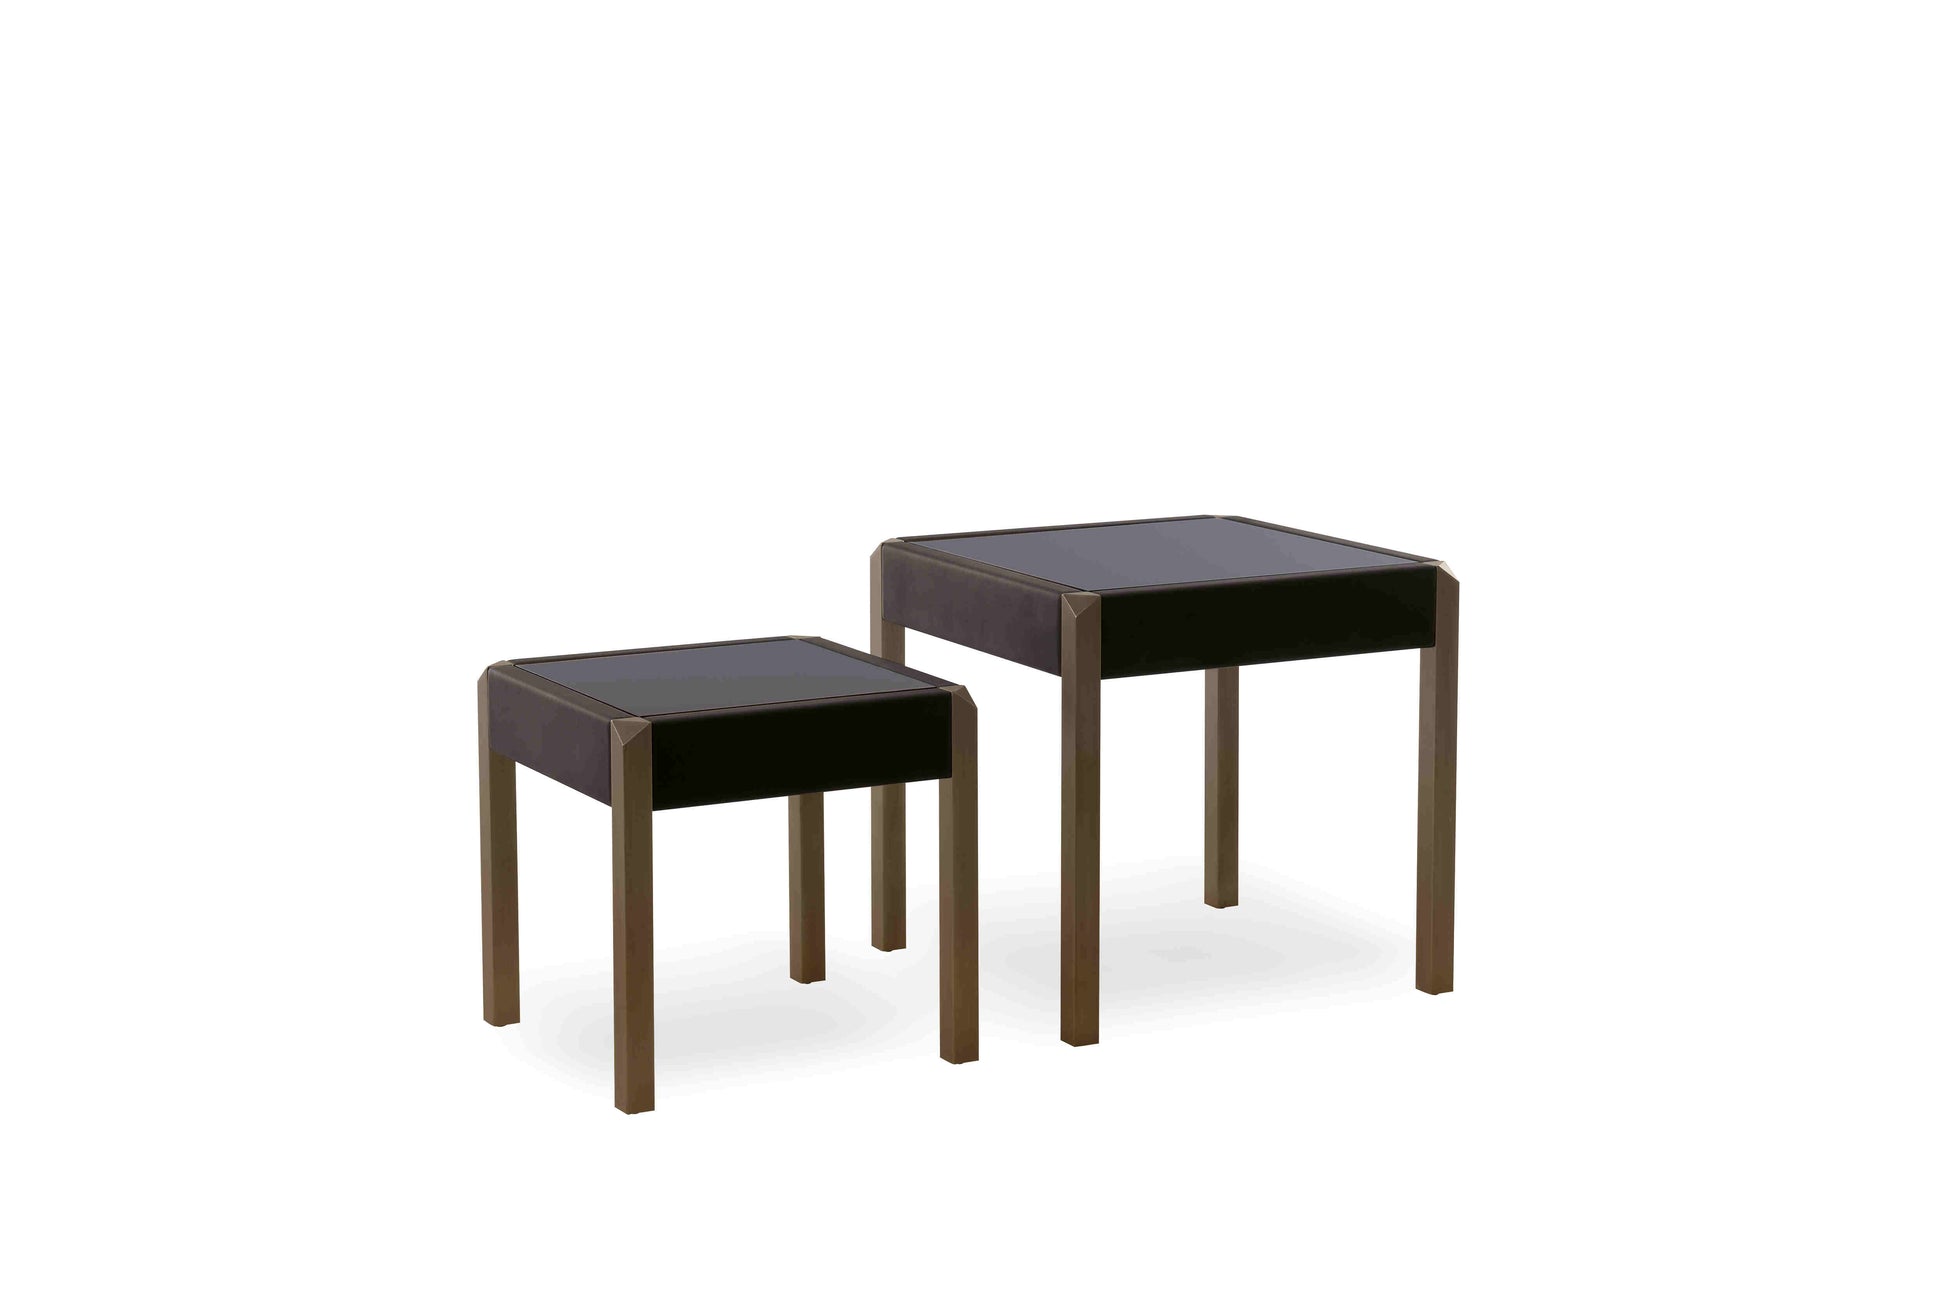 Trussardi Casa - Band side table